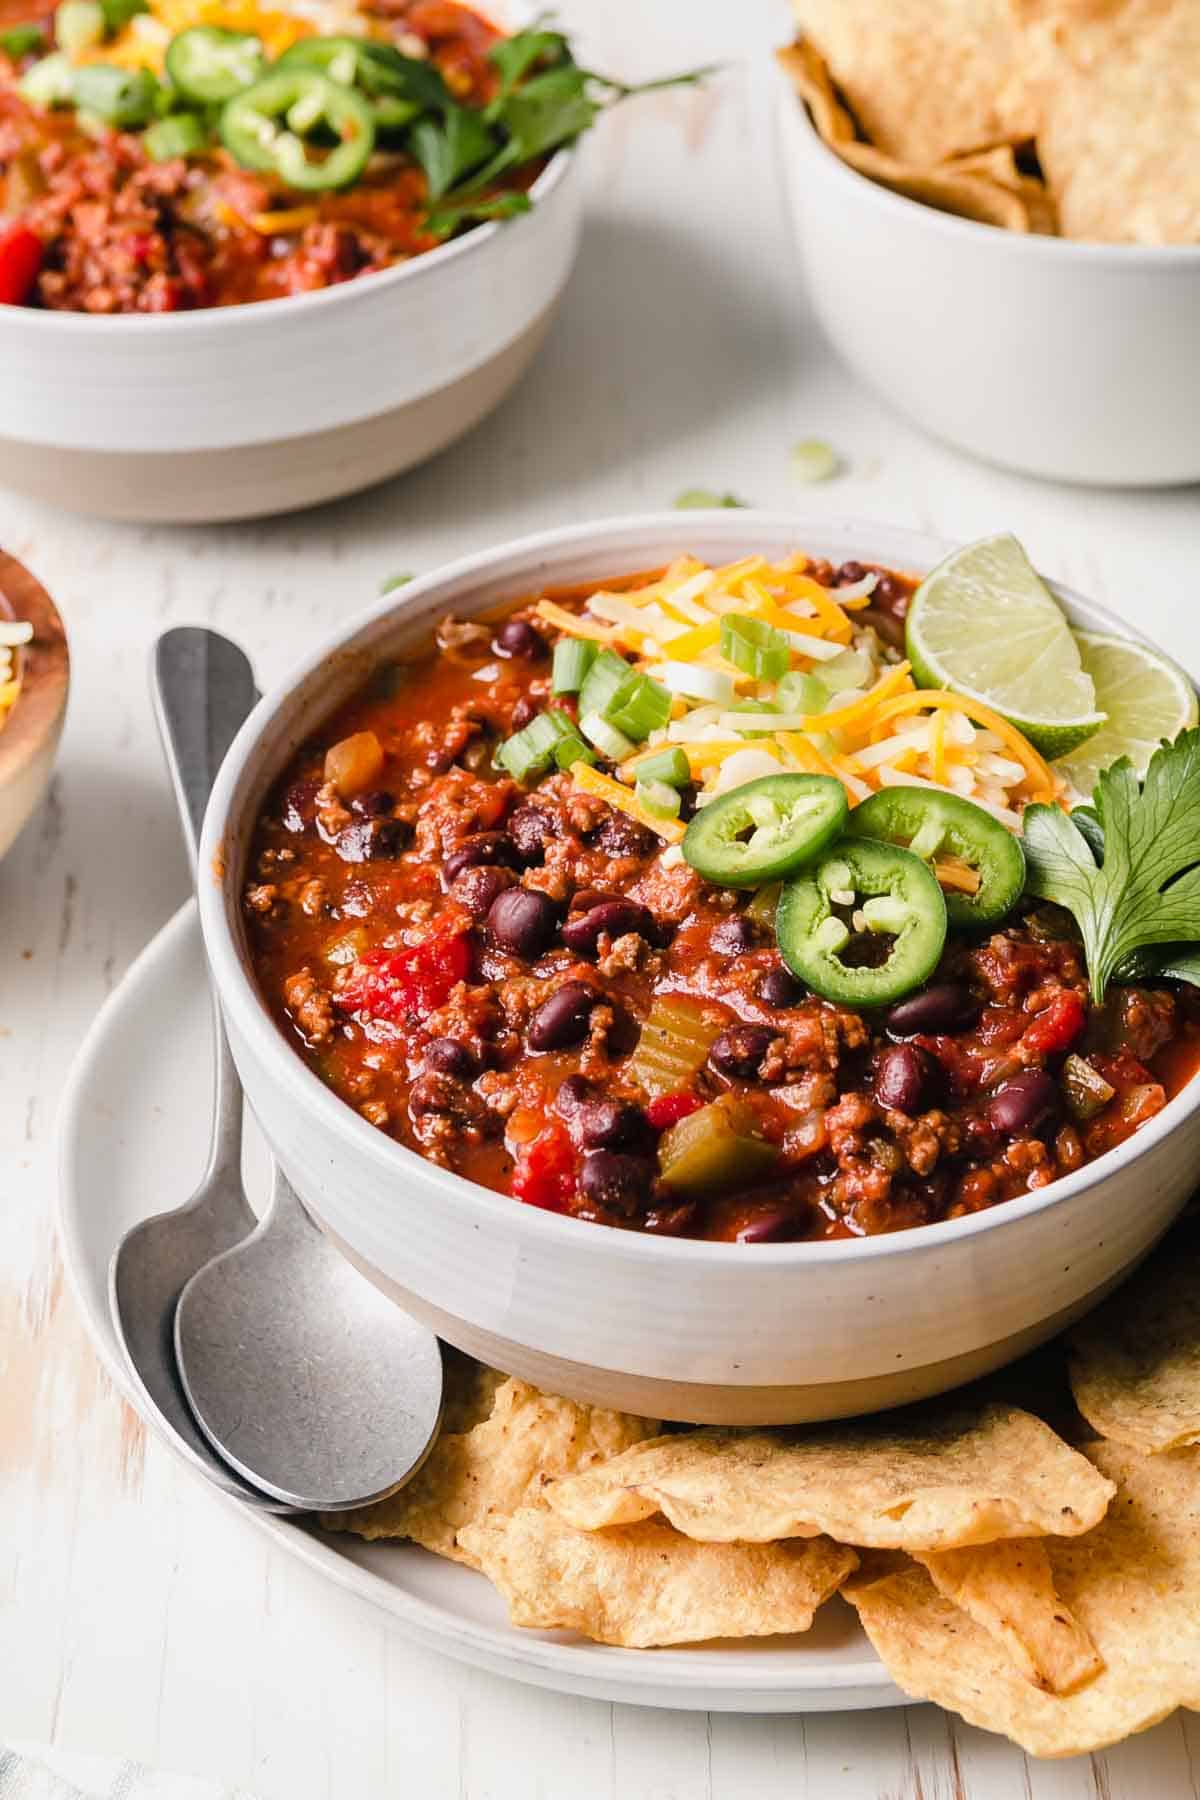 Gluten-free chili in a large bowl topped with cheese, jalapeño, and green onion.